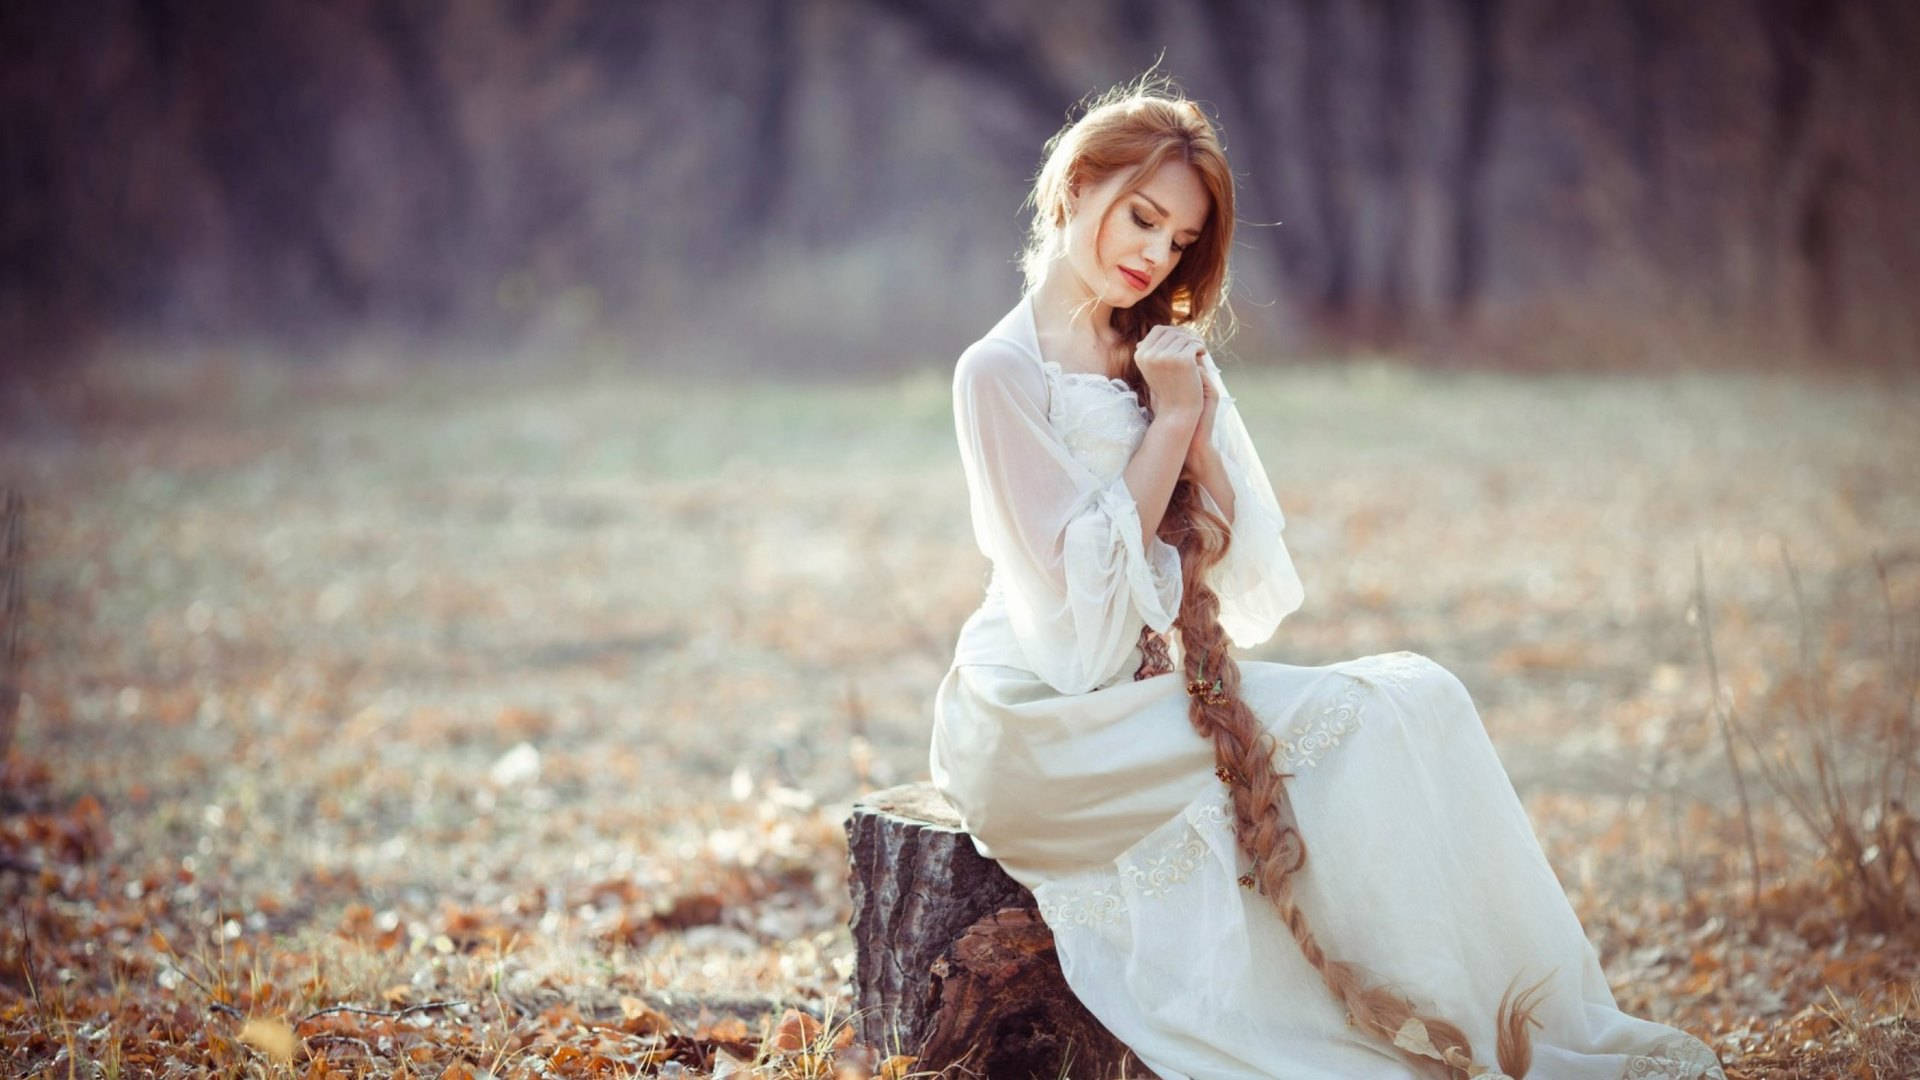 Elegant Lady Alone In The Woods Wallpaper